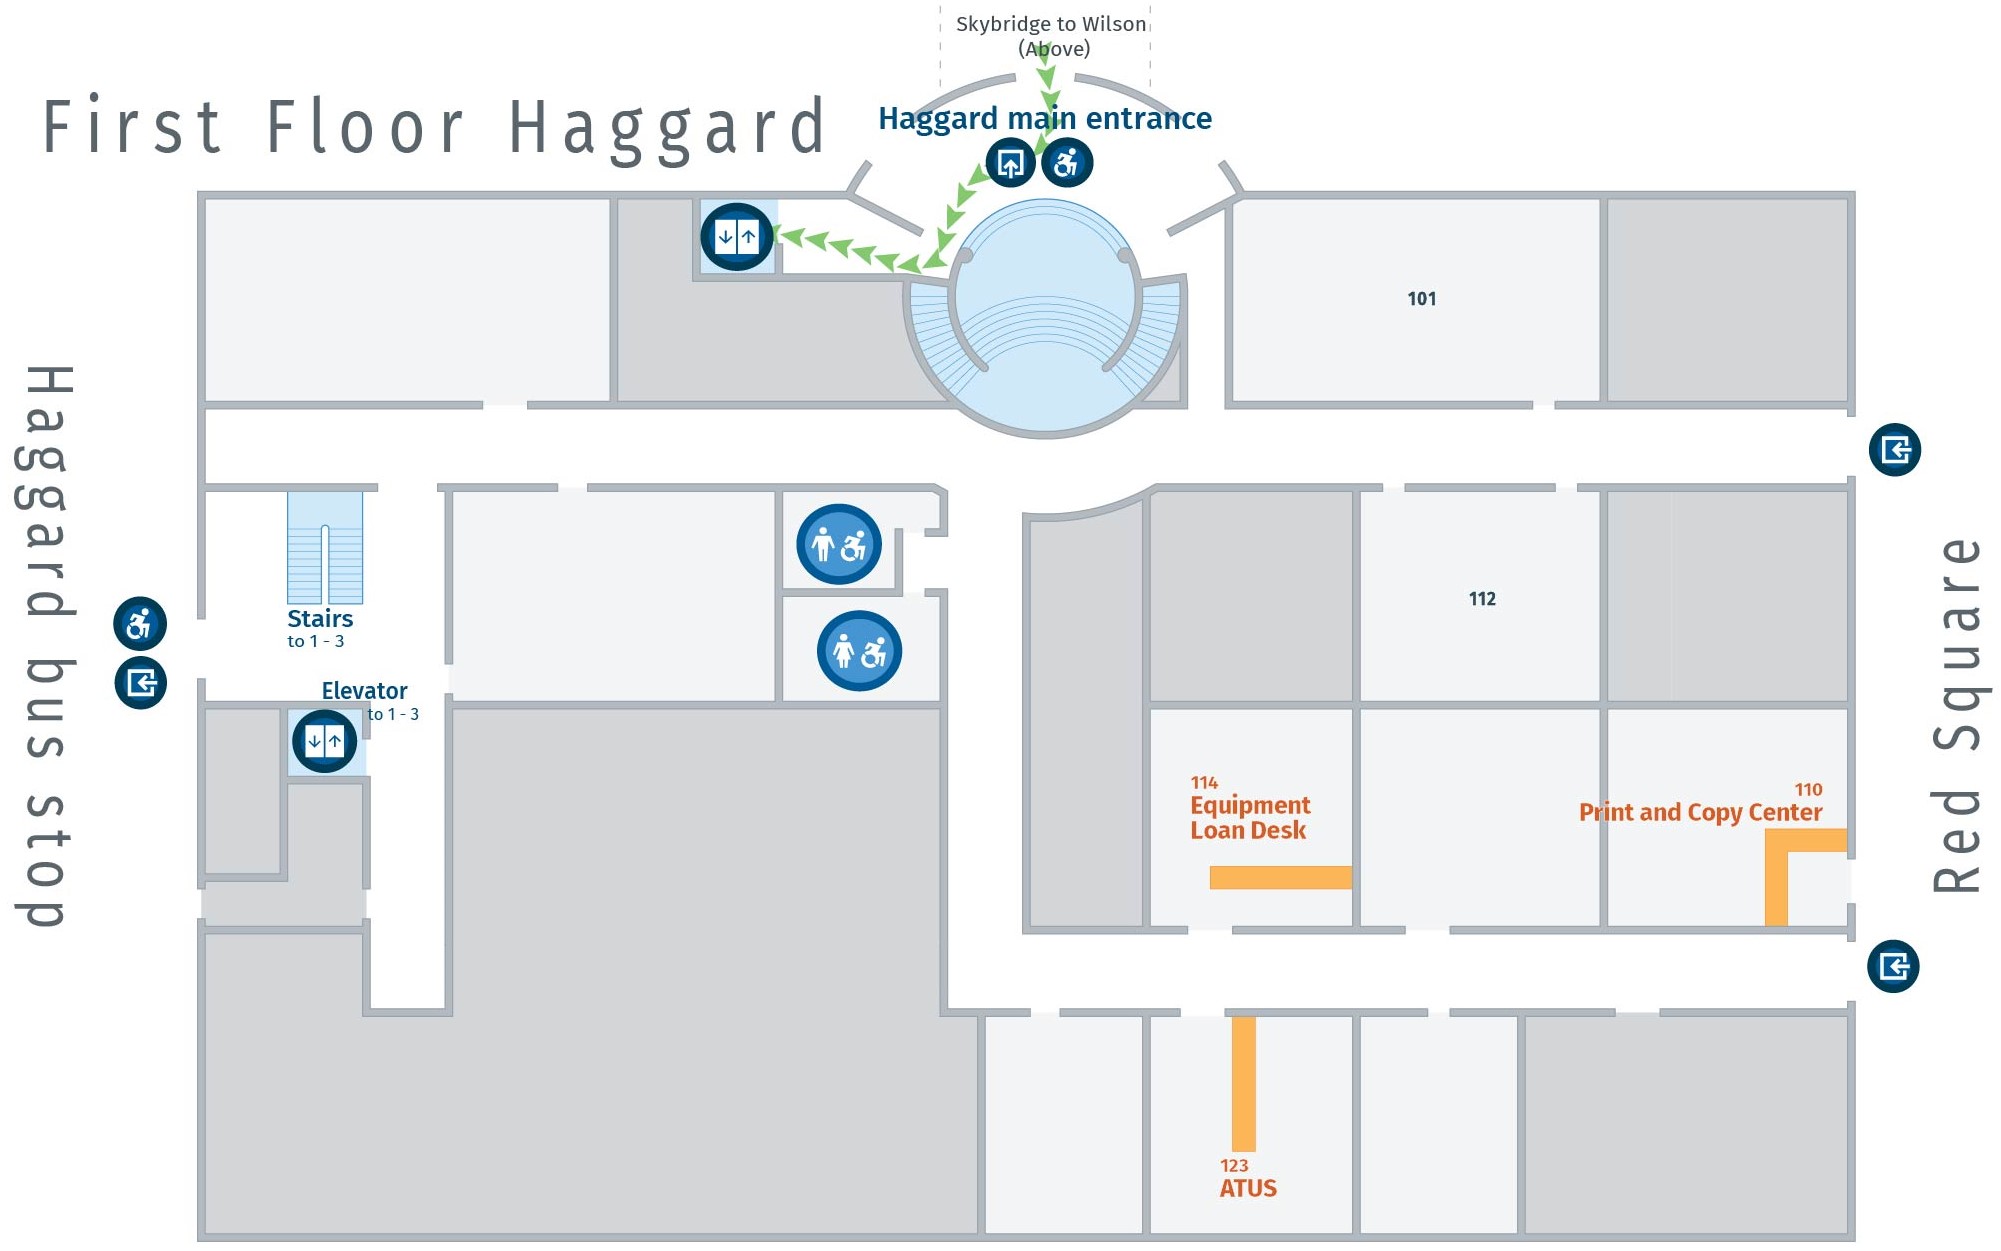 Floor plan, first floor of Haggard with path to the elevator near the Haggard main entrance.